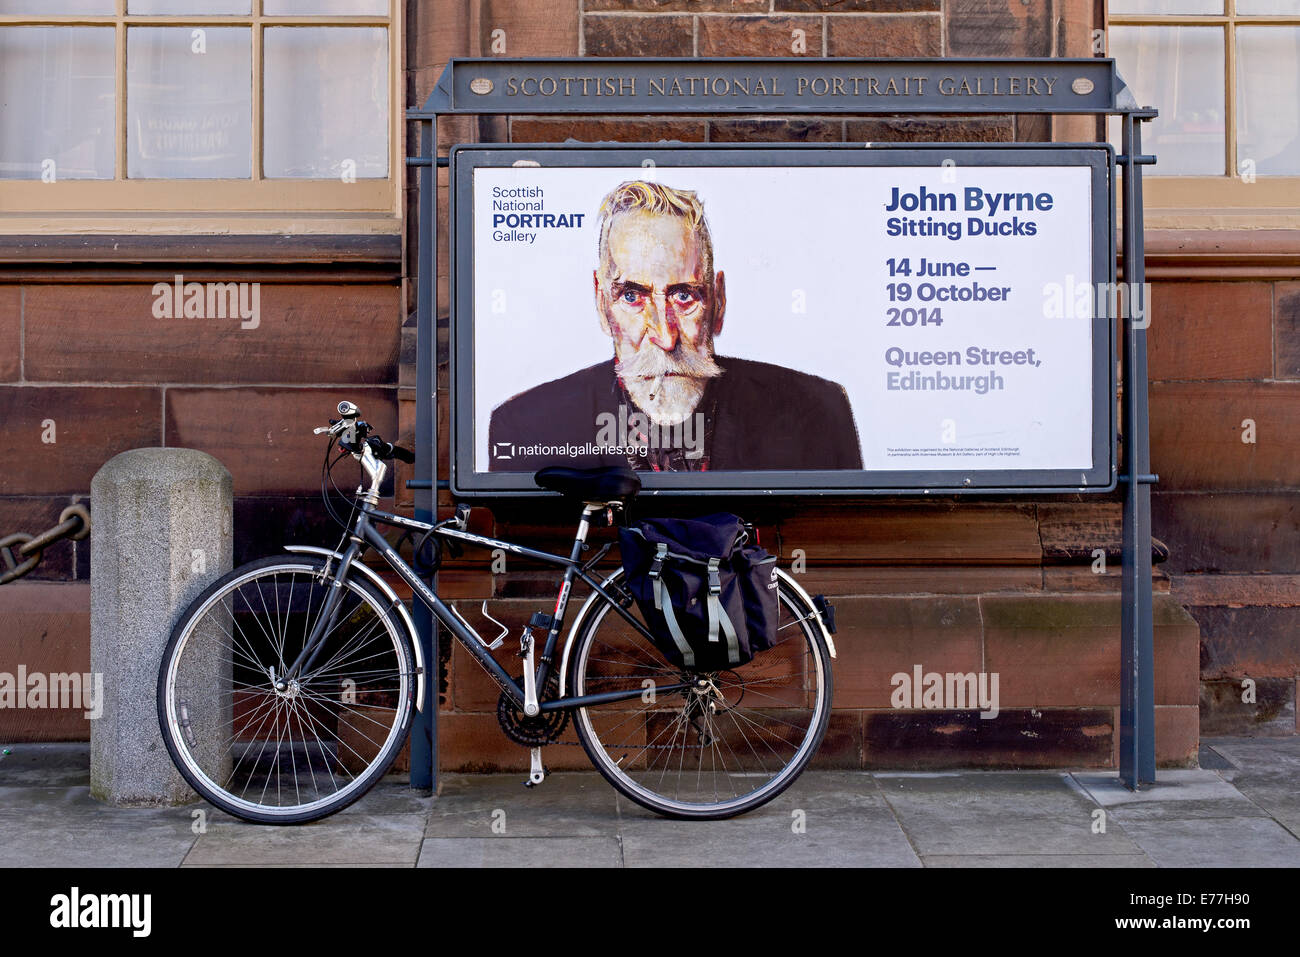 A bicycle attached to an advert for a John Byrne exhibition at the Scottish National Portrait Gallery in Edinburgh, Scotland, UK Stock Photo